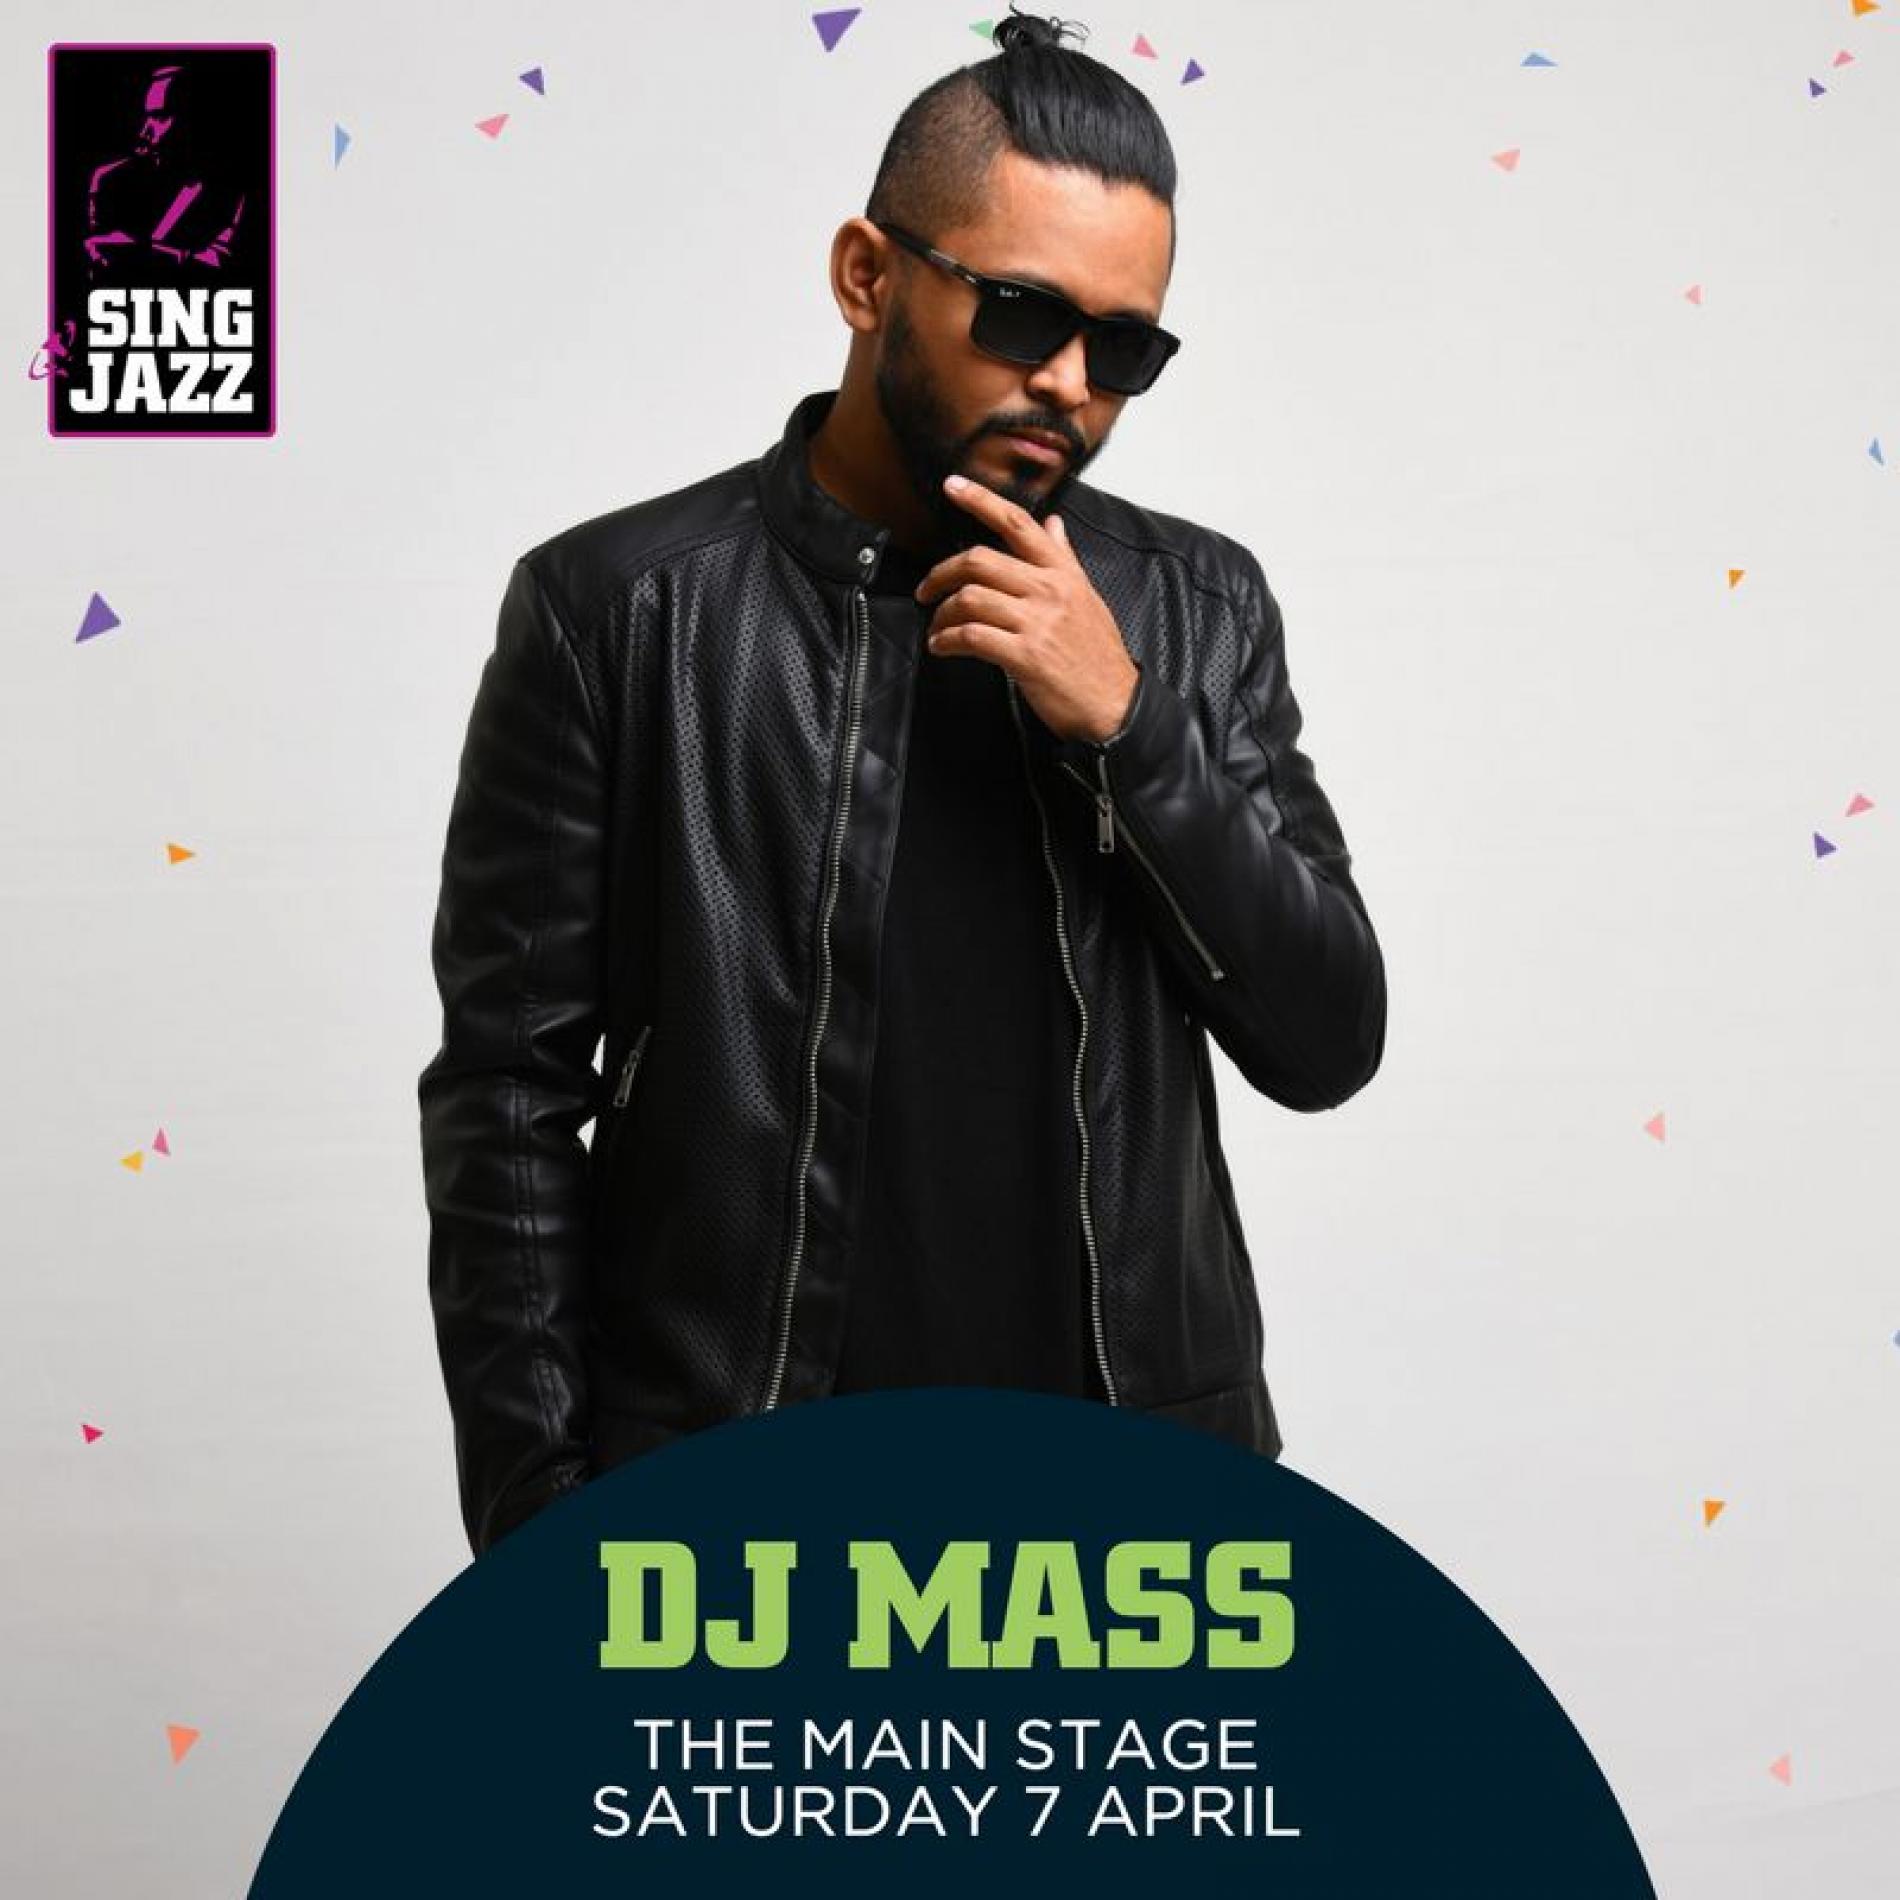 DJ Mass To Play At The Singapore Jazz Fest This Weekend!